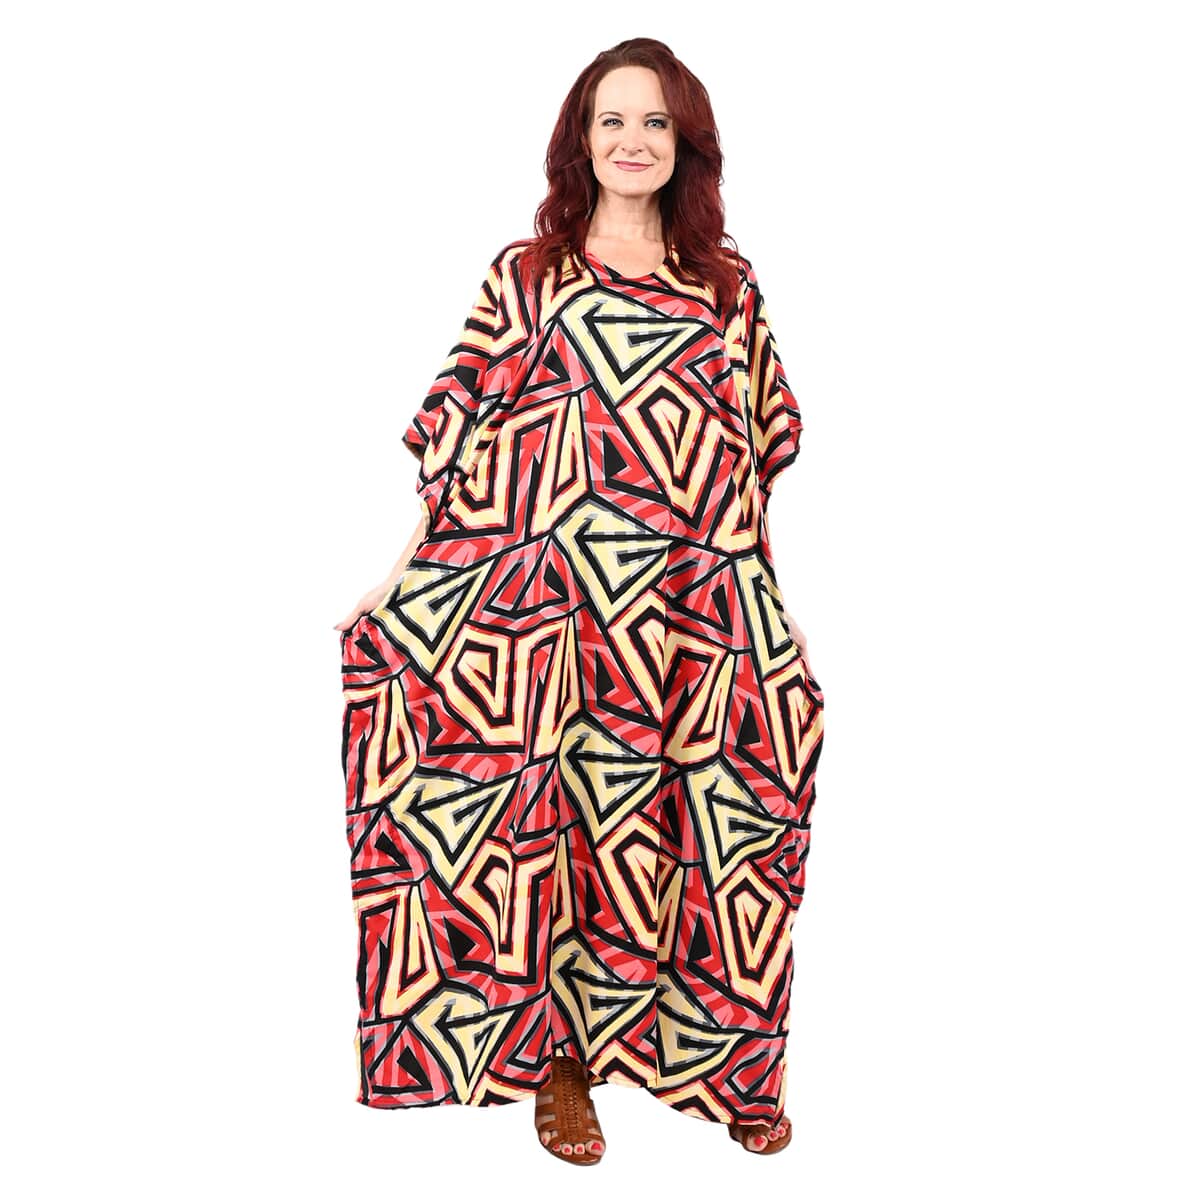 Winlar Red Triangle Print V-Neck Long Microfiber Kaftan Dress - One Size Fits Most, Holiday Dress, Swimsuit Cover Up, Beach Cover Ups, Holiday Clothes image number 0